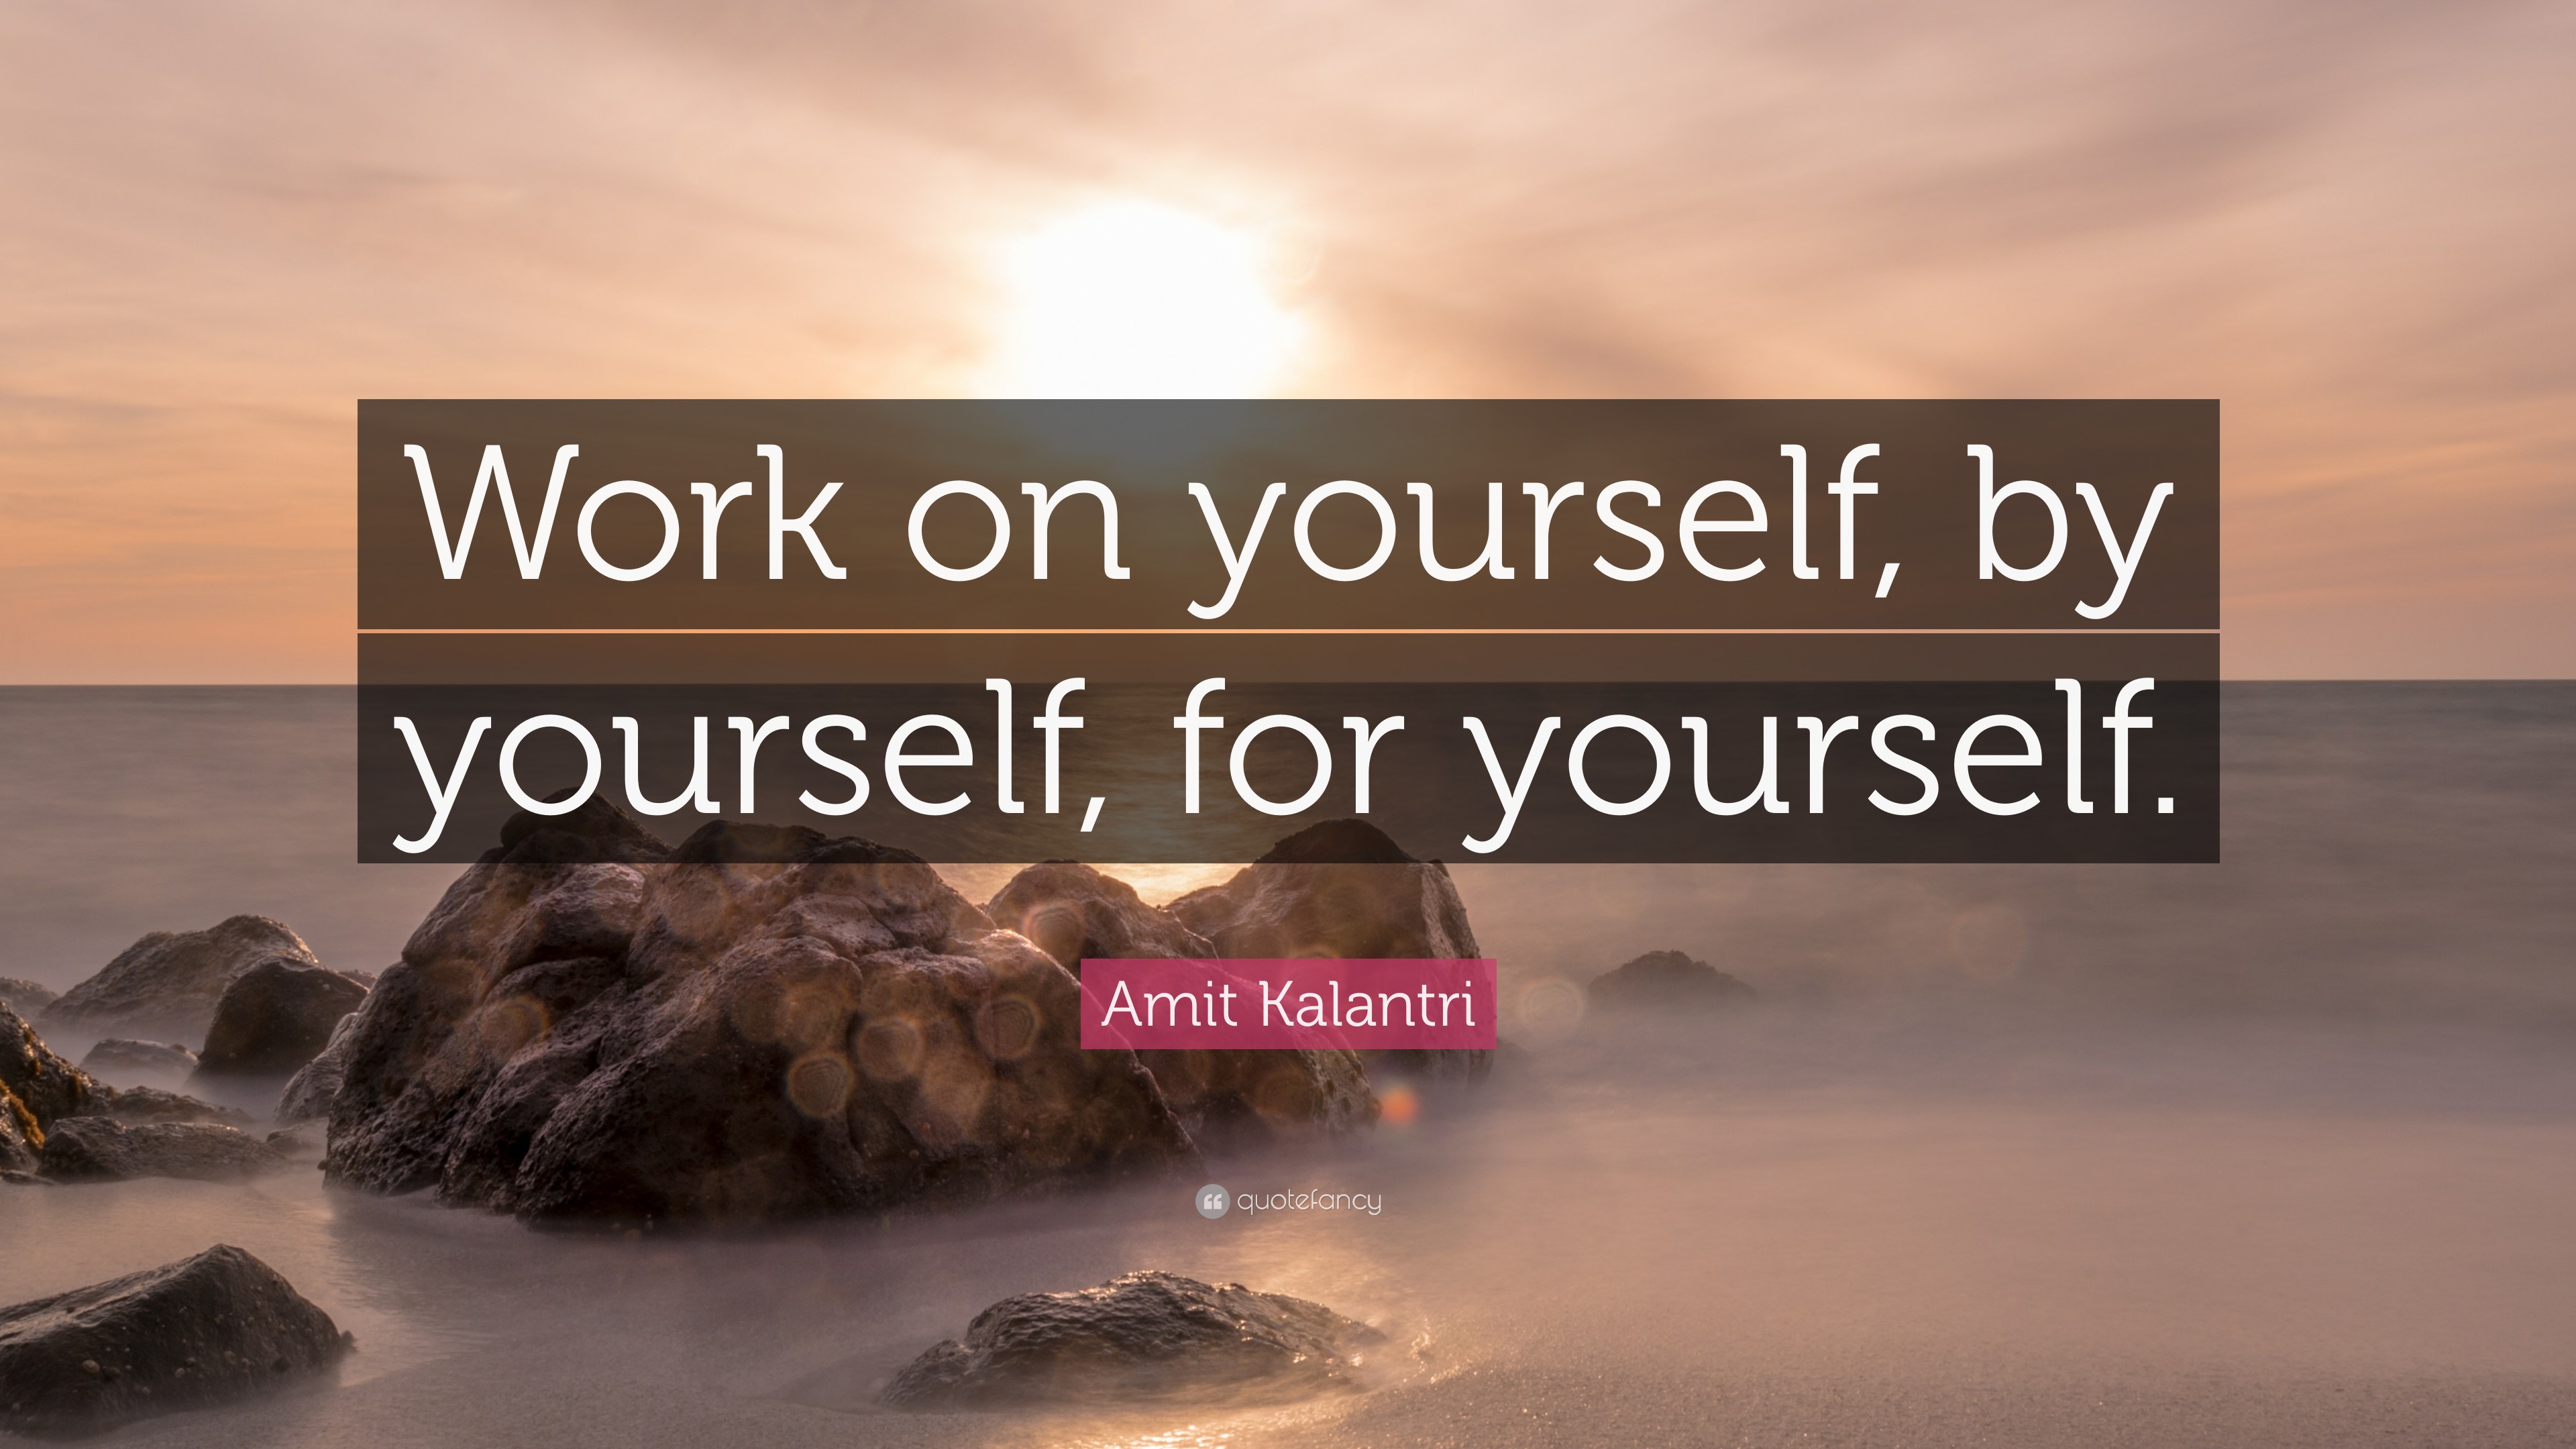 https://quotefancy.com/media/wallpaper/3840x2160/7373996-Amit-Kalantri-Quote-Work-on-yourself-by-yourself-for-yourself.jpg